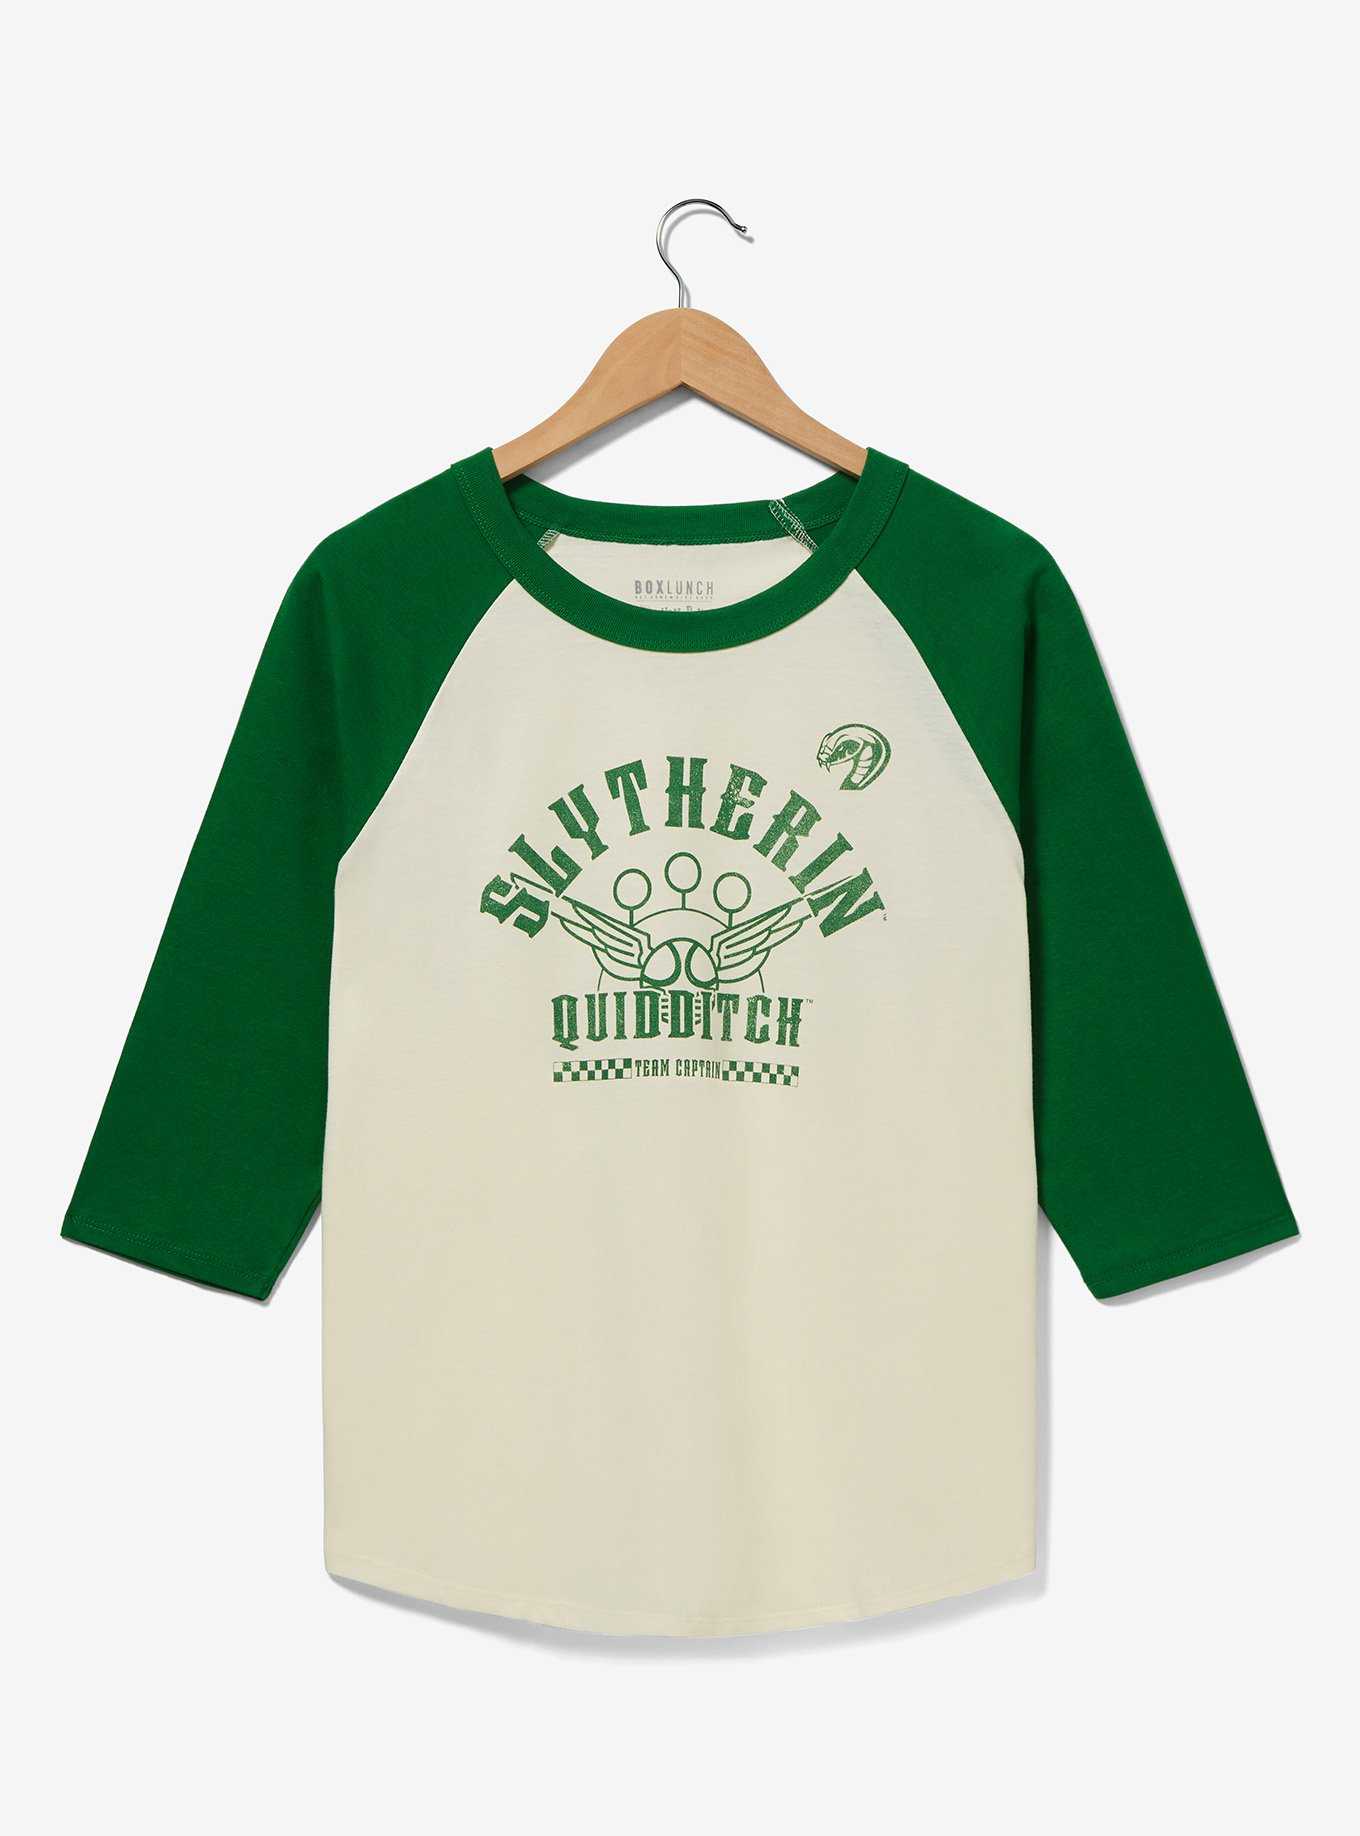 Harry Potter Slytherin Quidditch Raglan T-Shirt - BoxLunch Exclusive, , hi-res